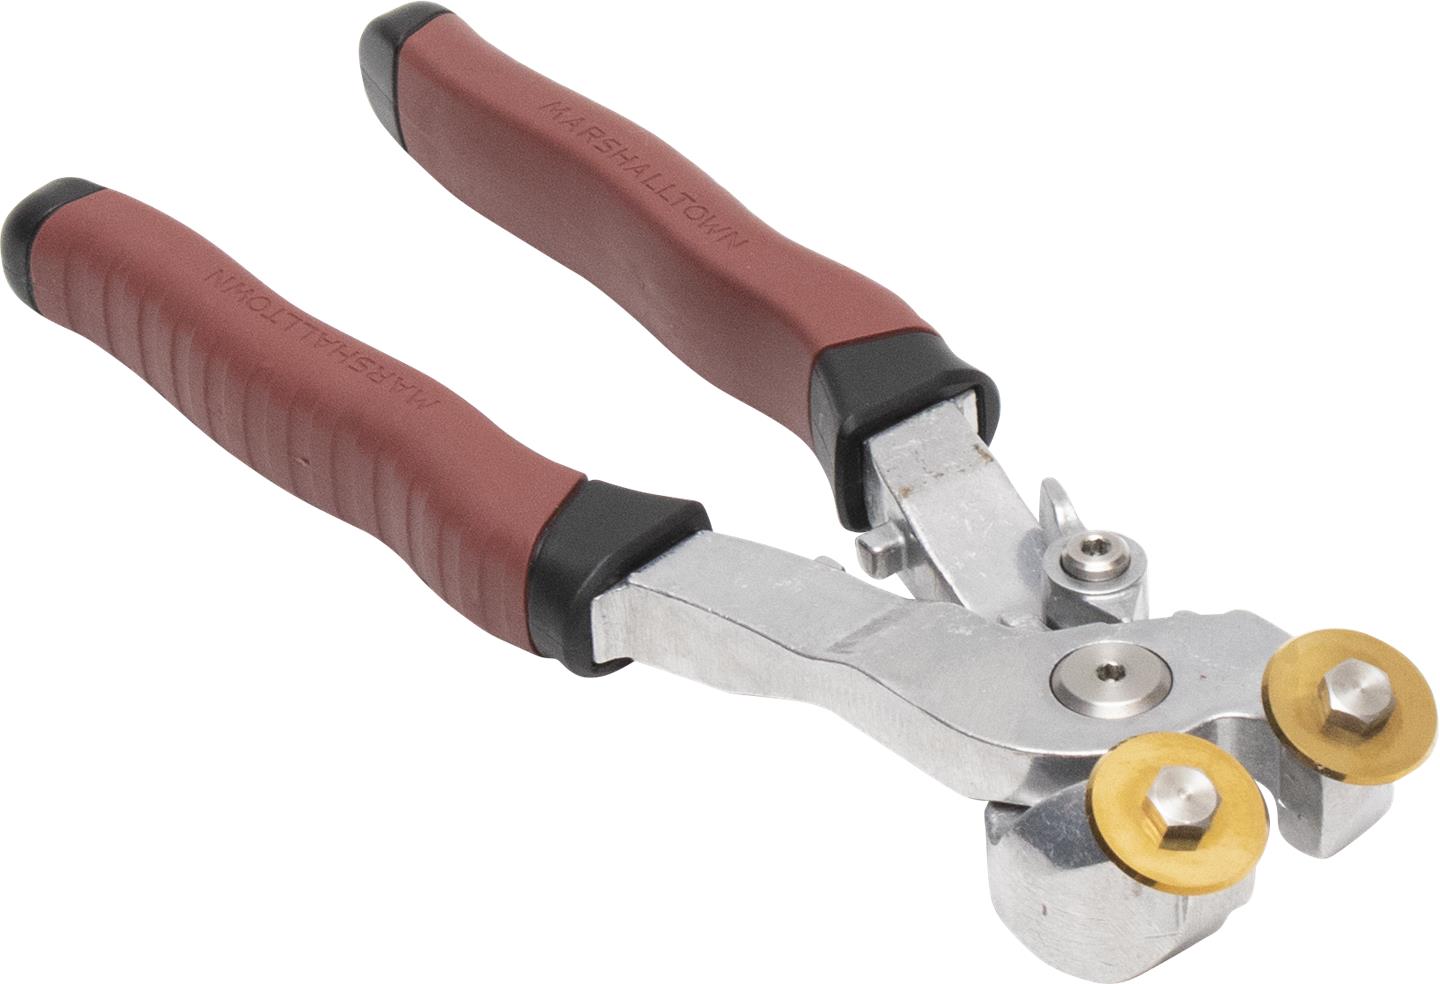 Marshalltown 29574 Professional Angled Tile Nippers